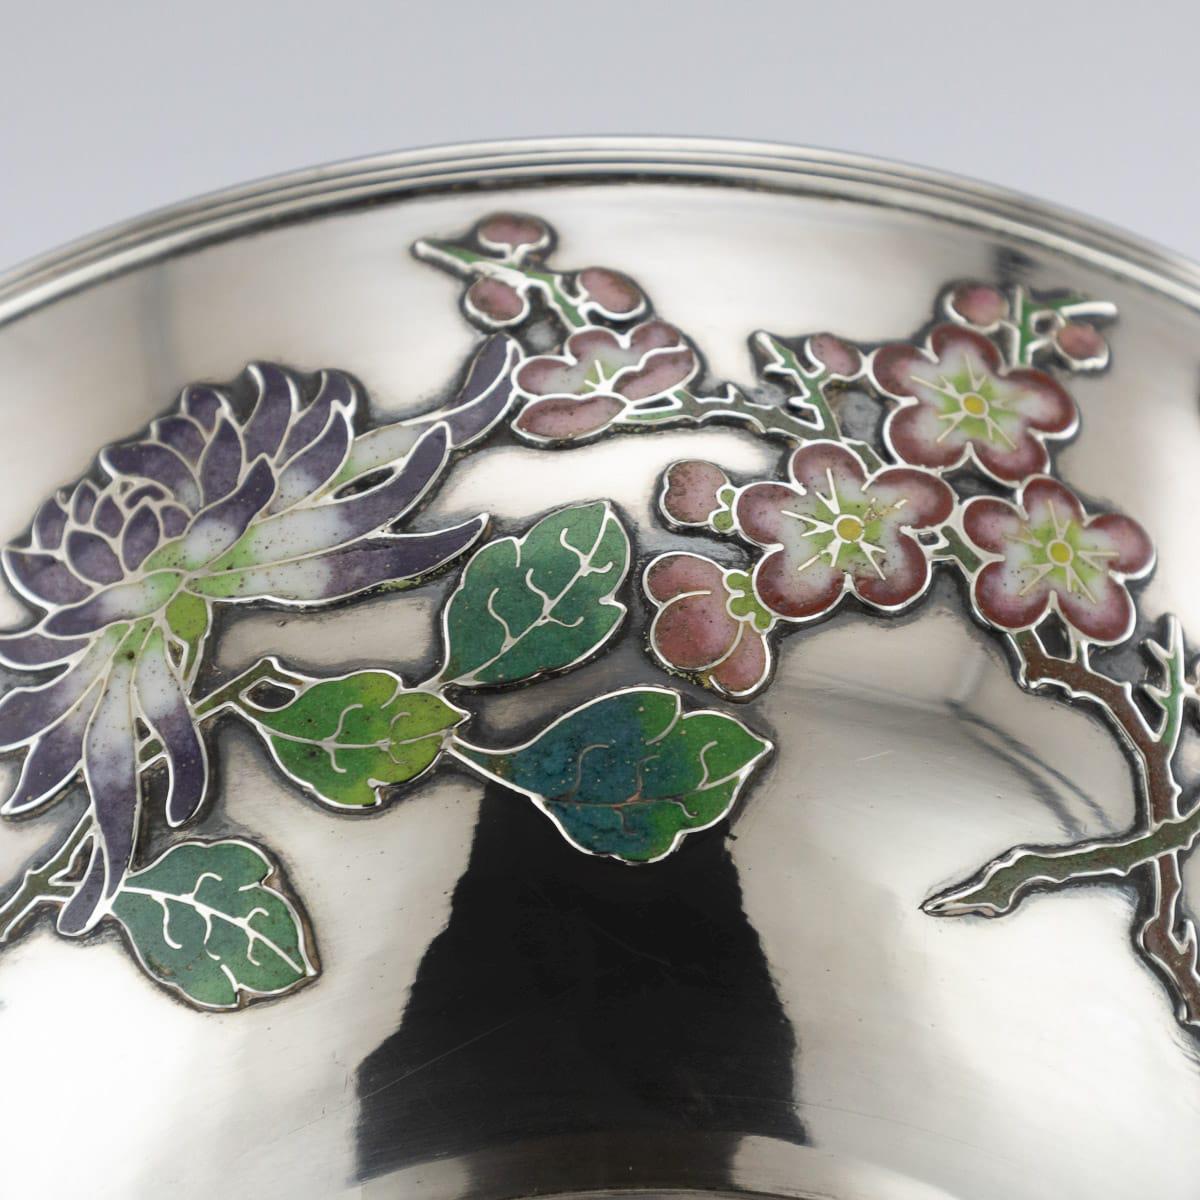 19th Century Rare Chinese Export Solid Silver & Enamel Bowl, Wo Kwong circa 1890 For Sale 9